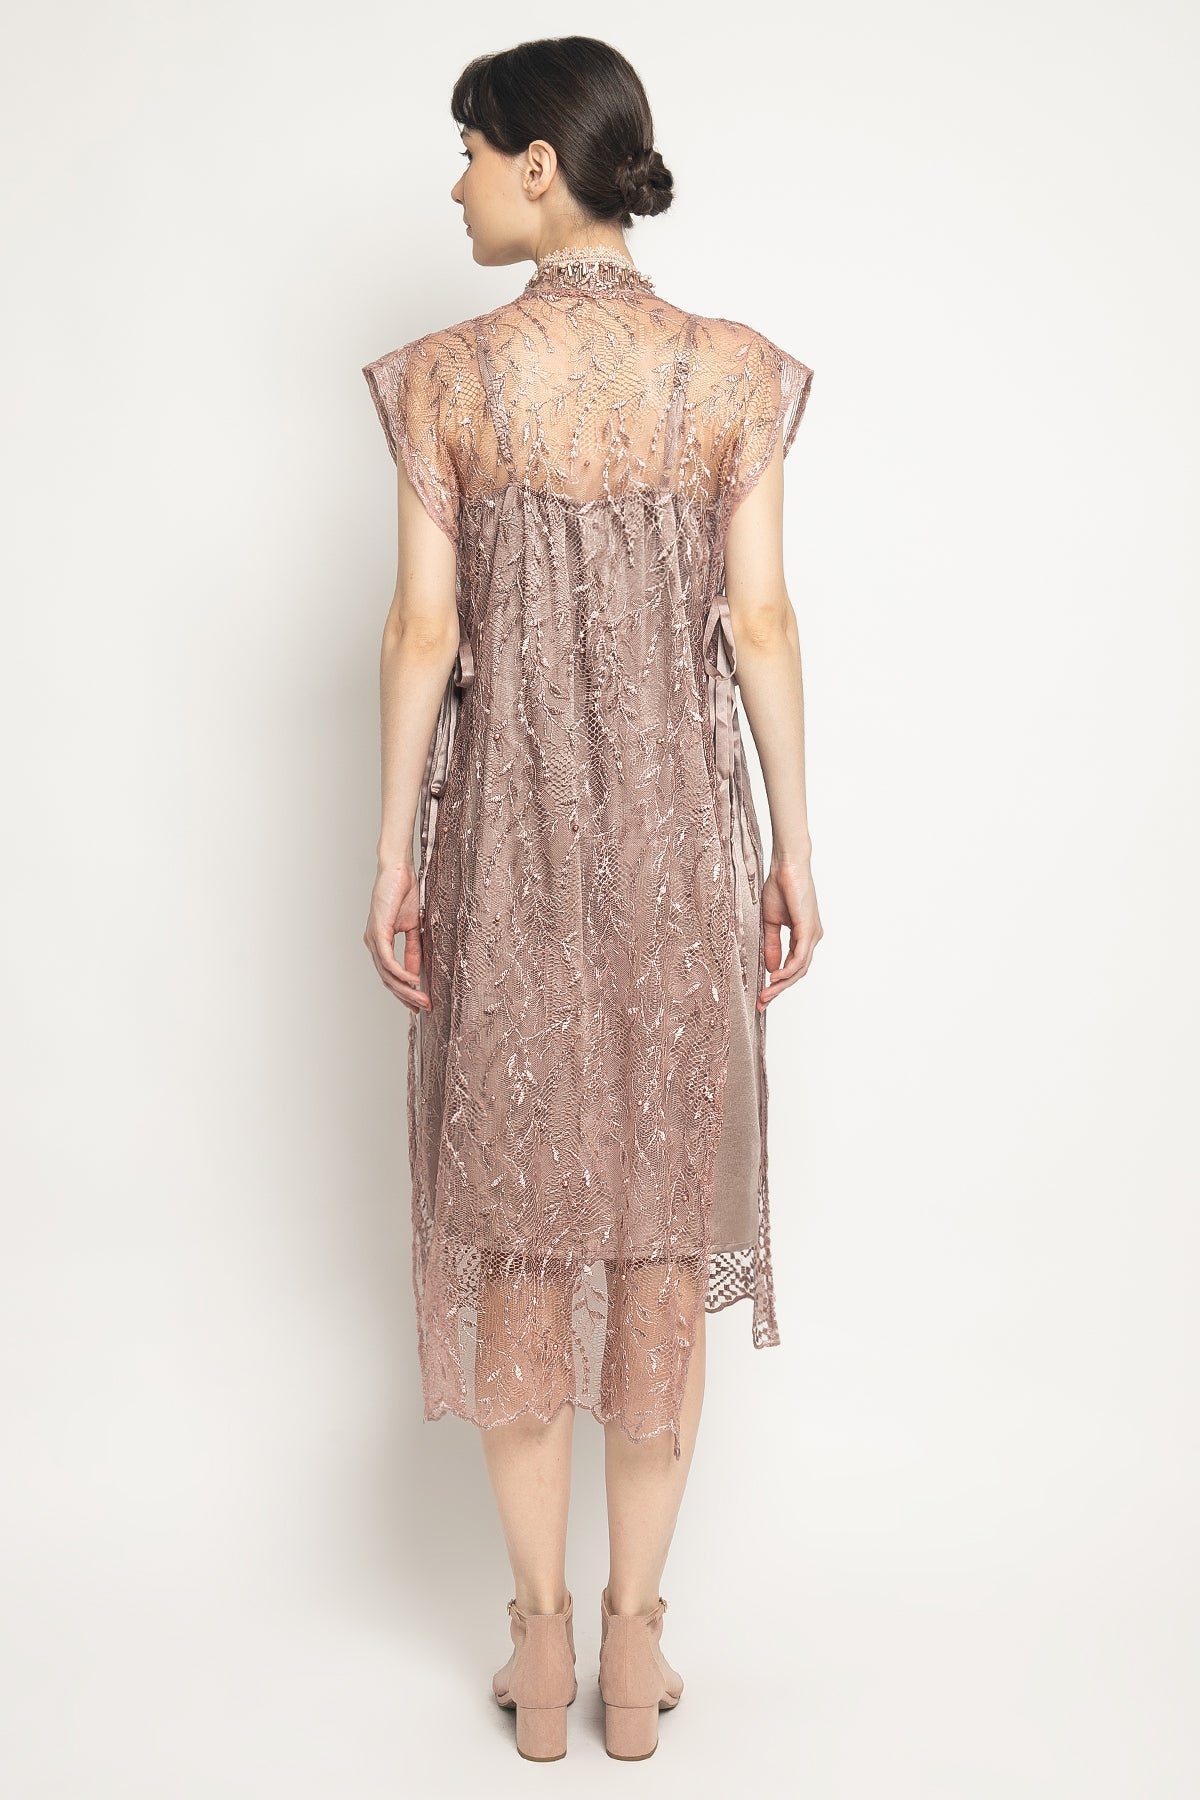 Lyca Outer Dress in Rose Gold